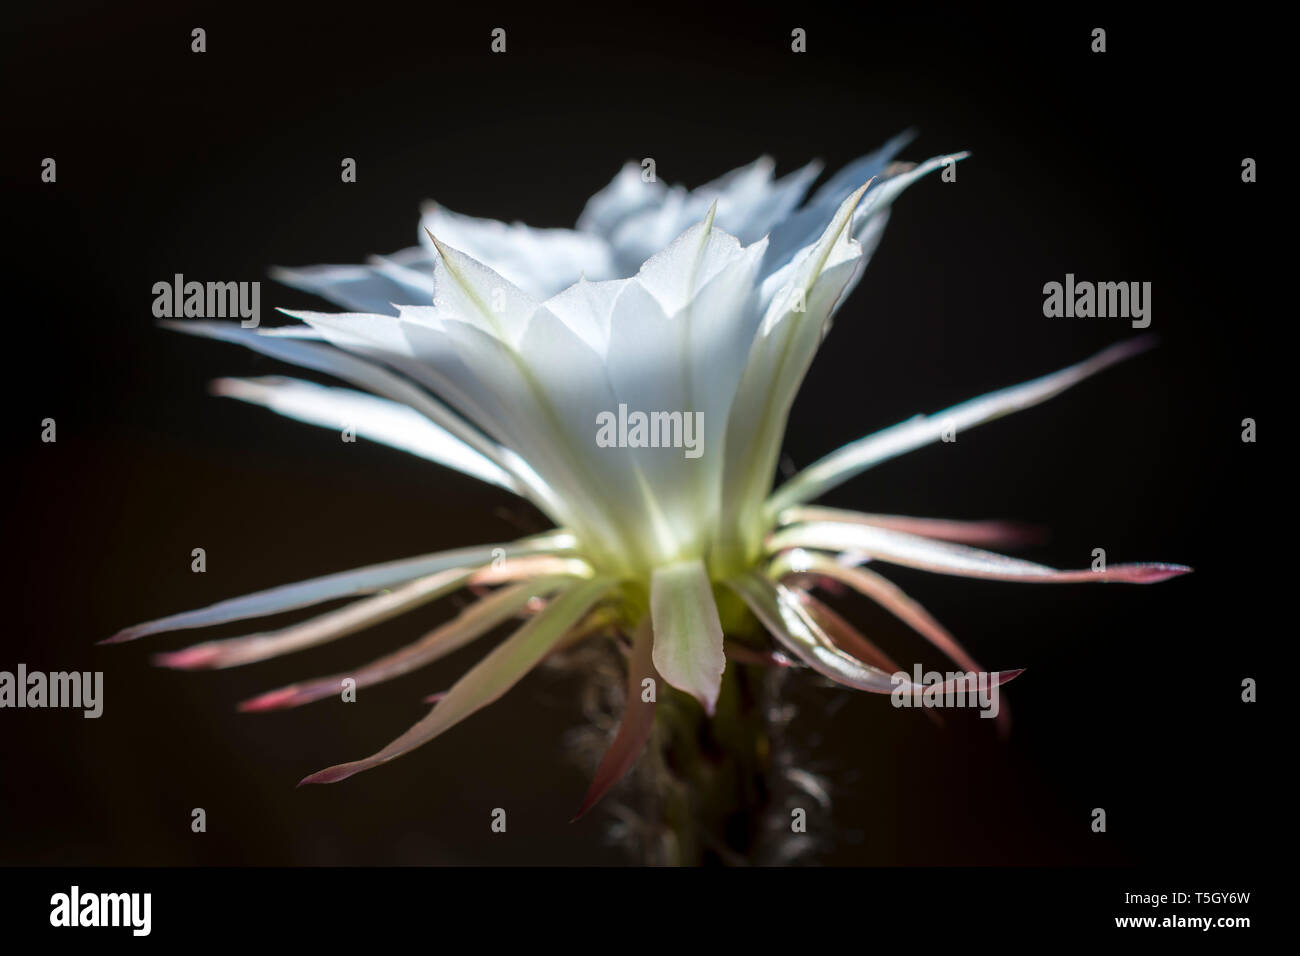 White blossom of Easter Lily Cactus against black background Stock Photo